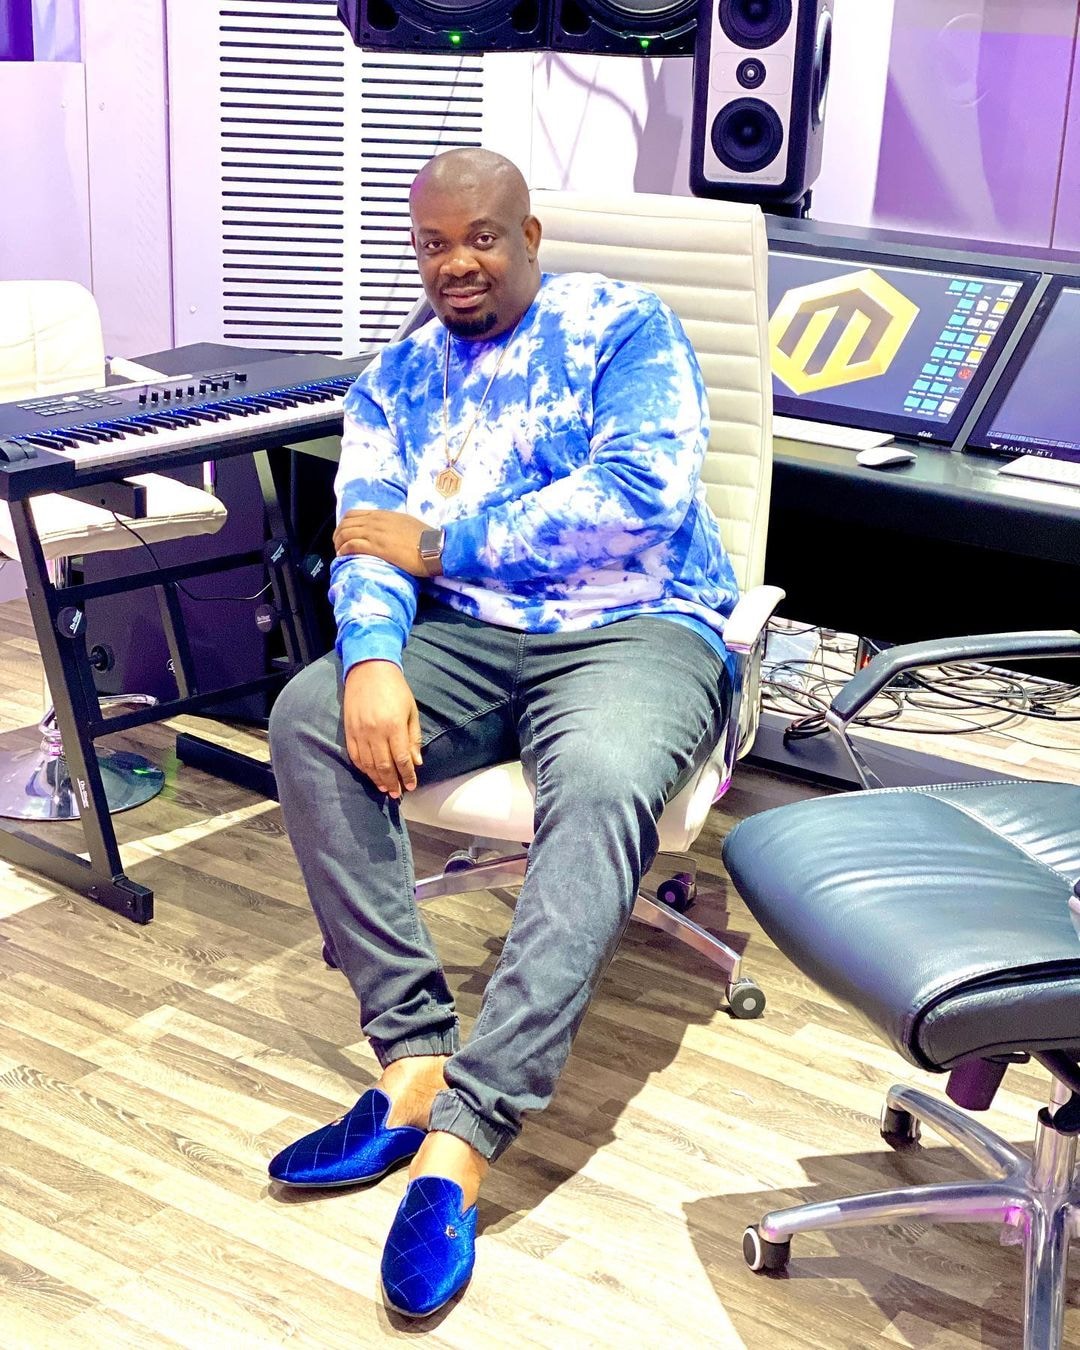 Don Jazzy reacts to report that Rihanna is happy in relationship with Asap Rocky